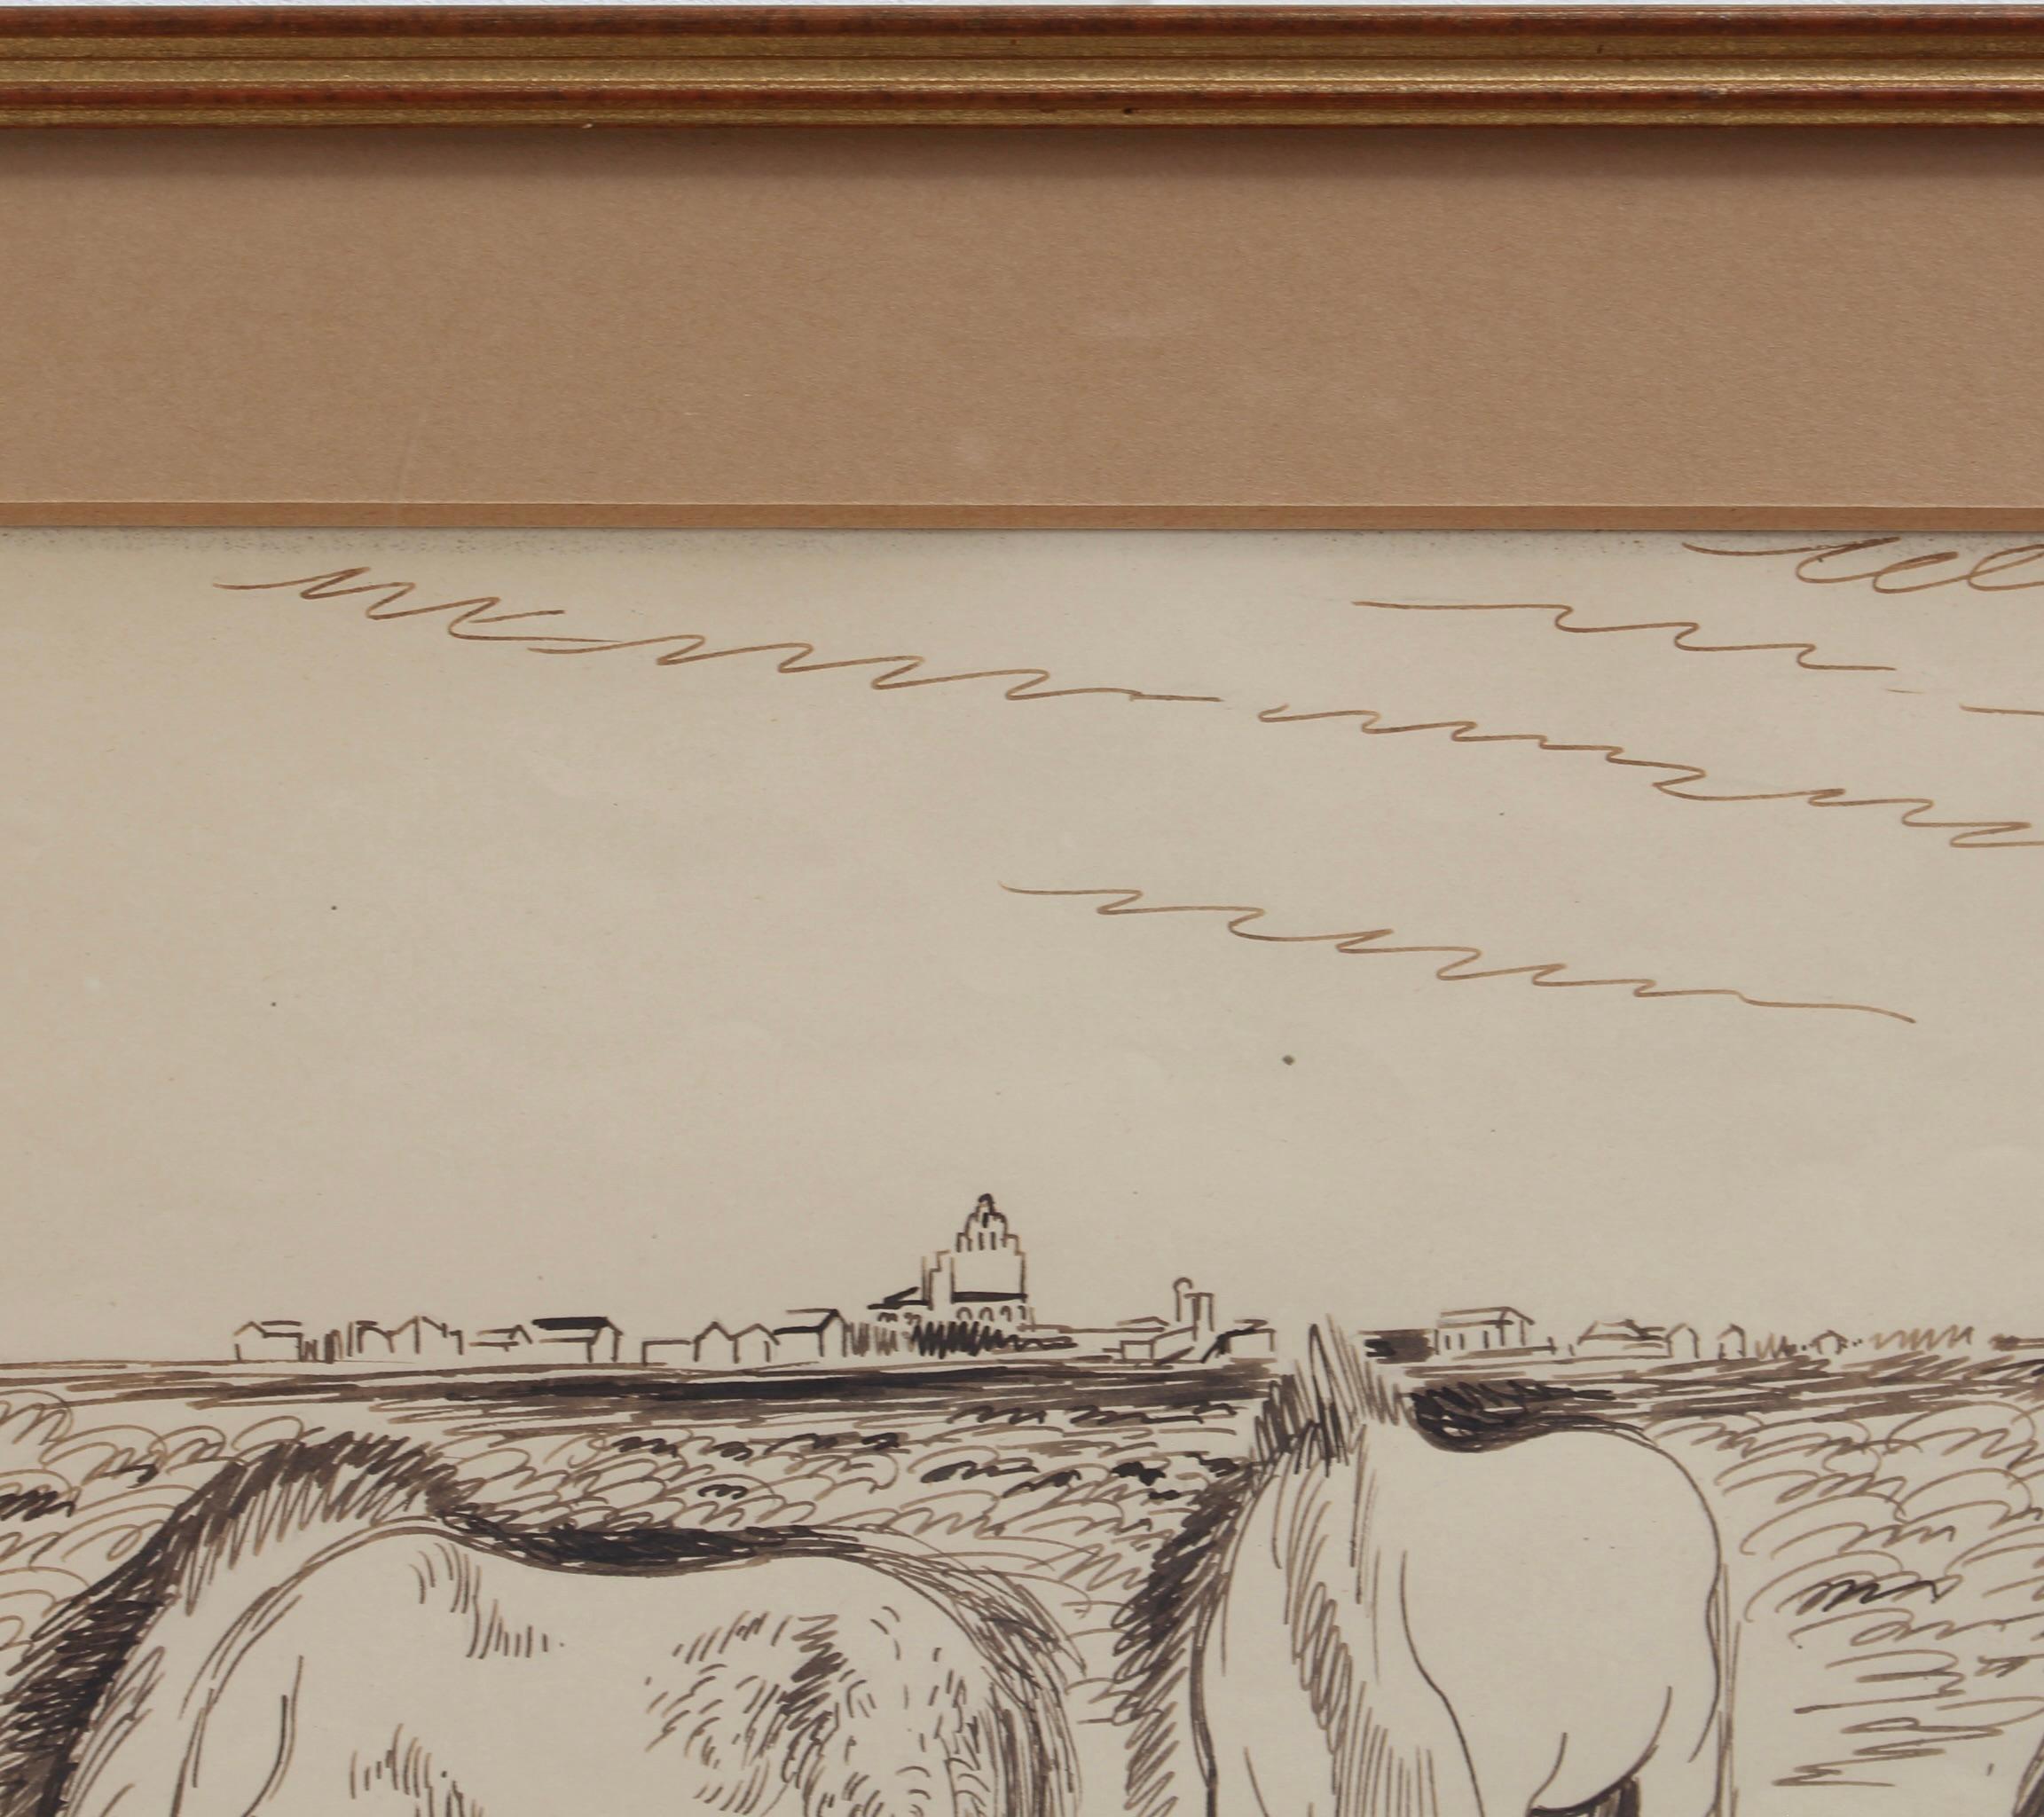 'Grazing Horses in the Camargue', pen and ink on paper, by Genevieve Gallibert (circa 1930s). Like her famous French counterpart, Yves Brayer, Gallibert was also known for her artworks depicting the landscapes, wildlife and people of the Camargue